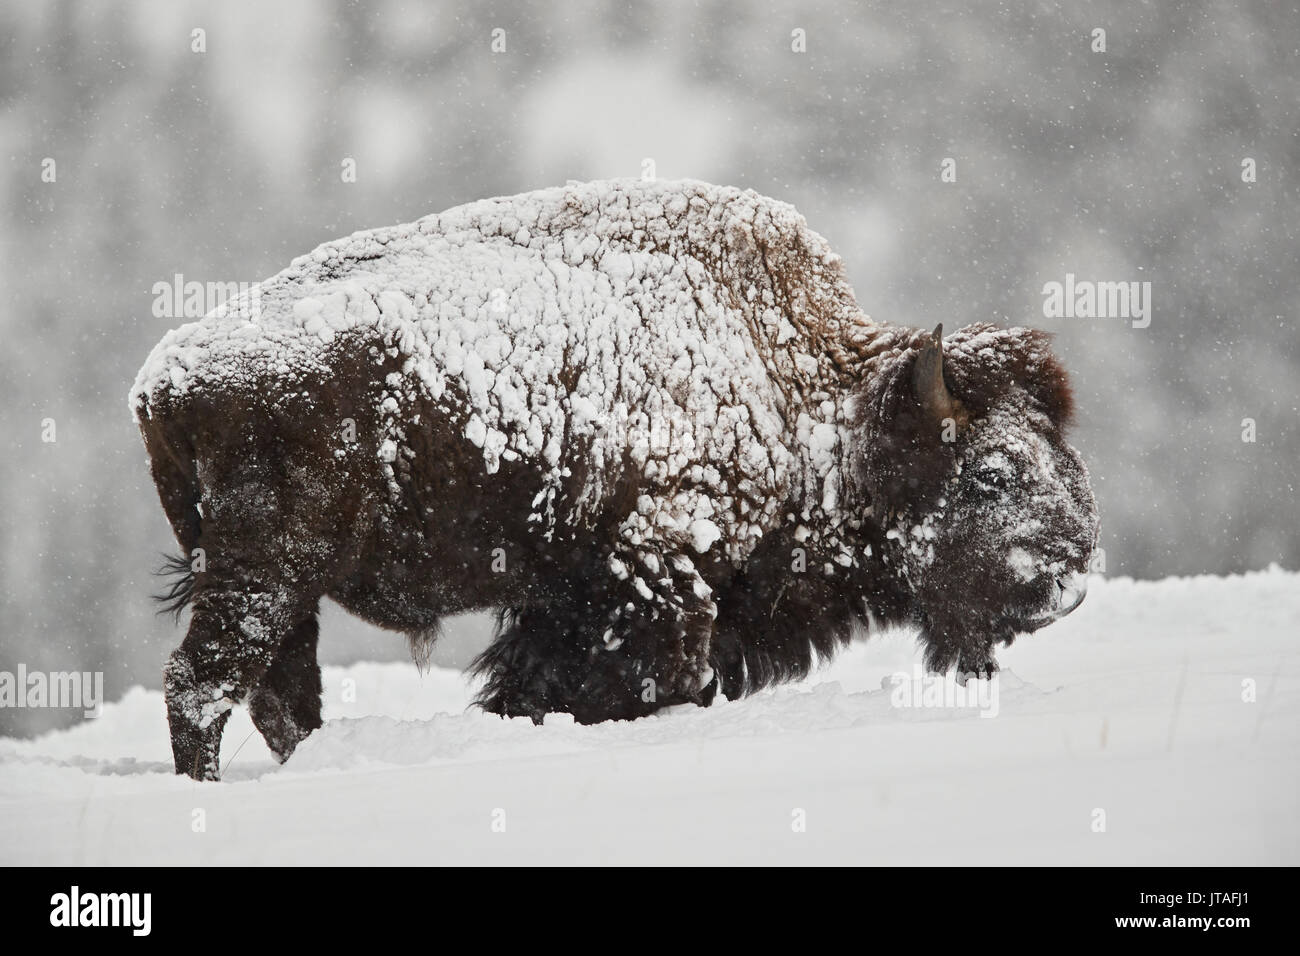 Bison (Bison bison) bull covered with snow in snowfall in the winter, Yellowstone National Park, Wyoming, USA, North America Stock Photo